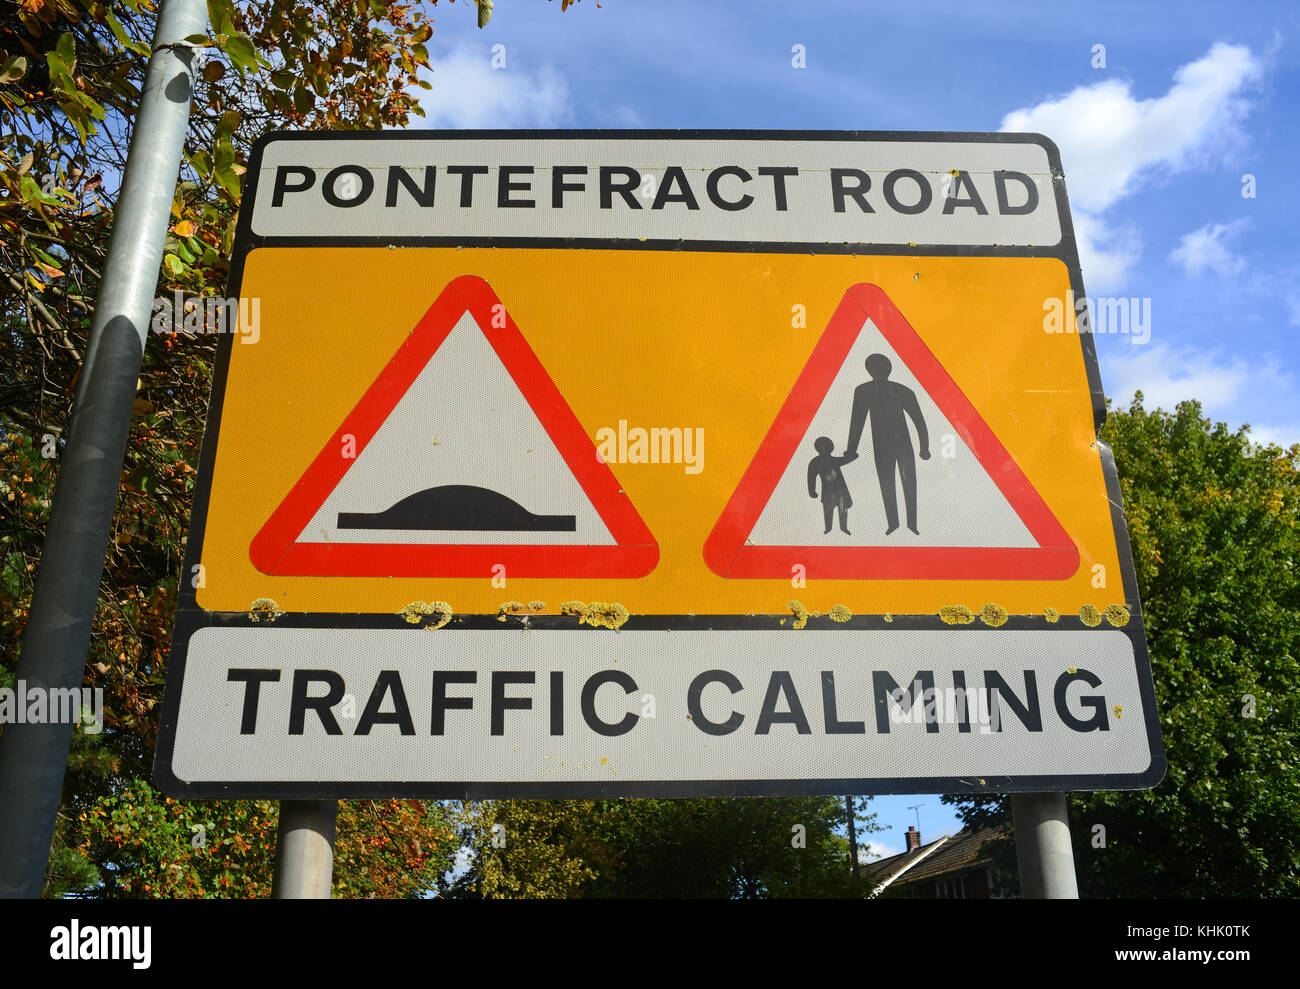 traffic calming warning sign of speed bumps and pedestrians in road ahead, pontefract road ferrybridge yorkshire united kingdom Stock Photo